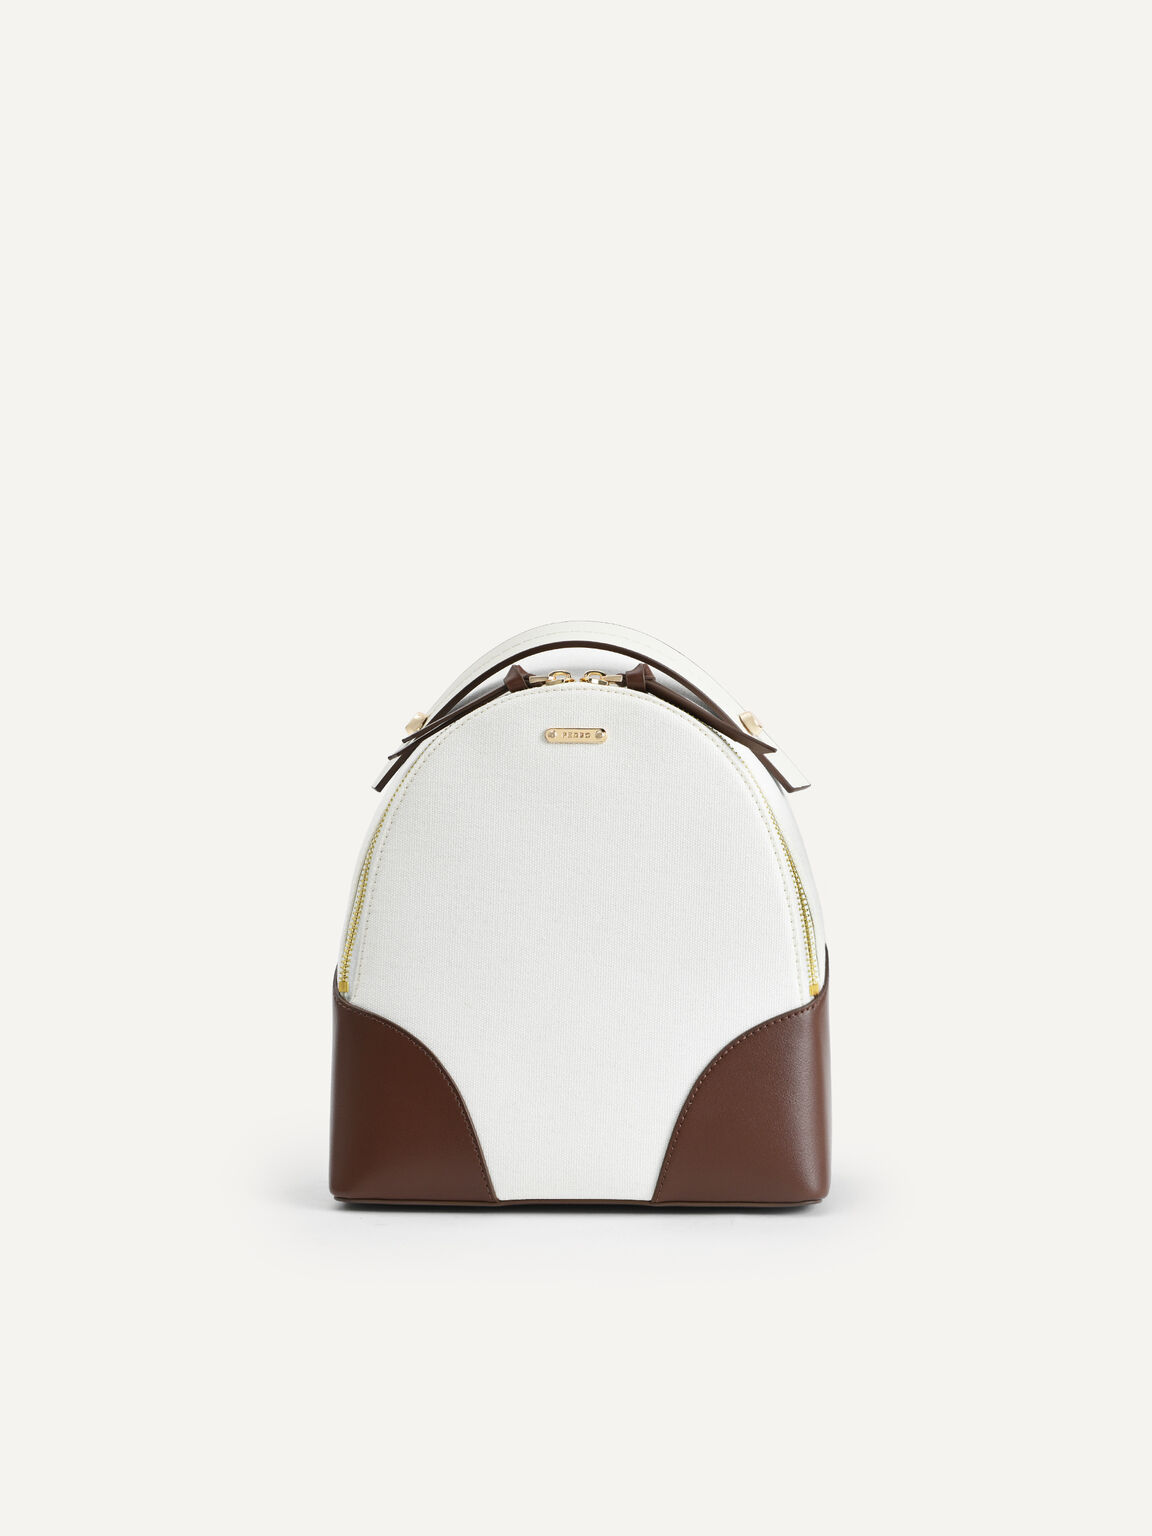 Curved Backpack - Multi